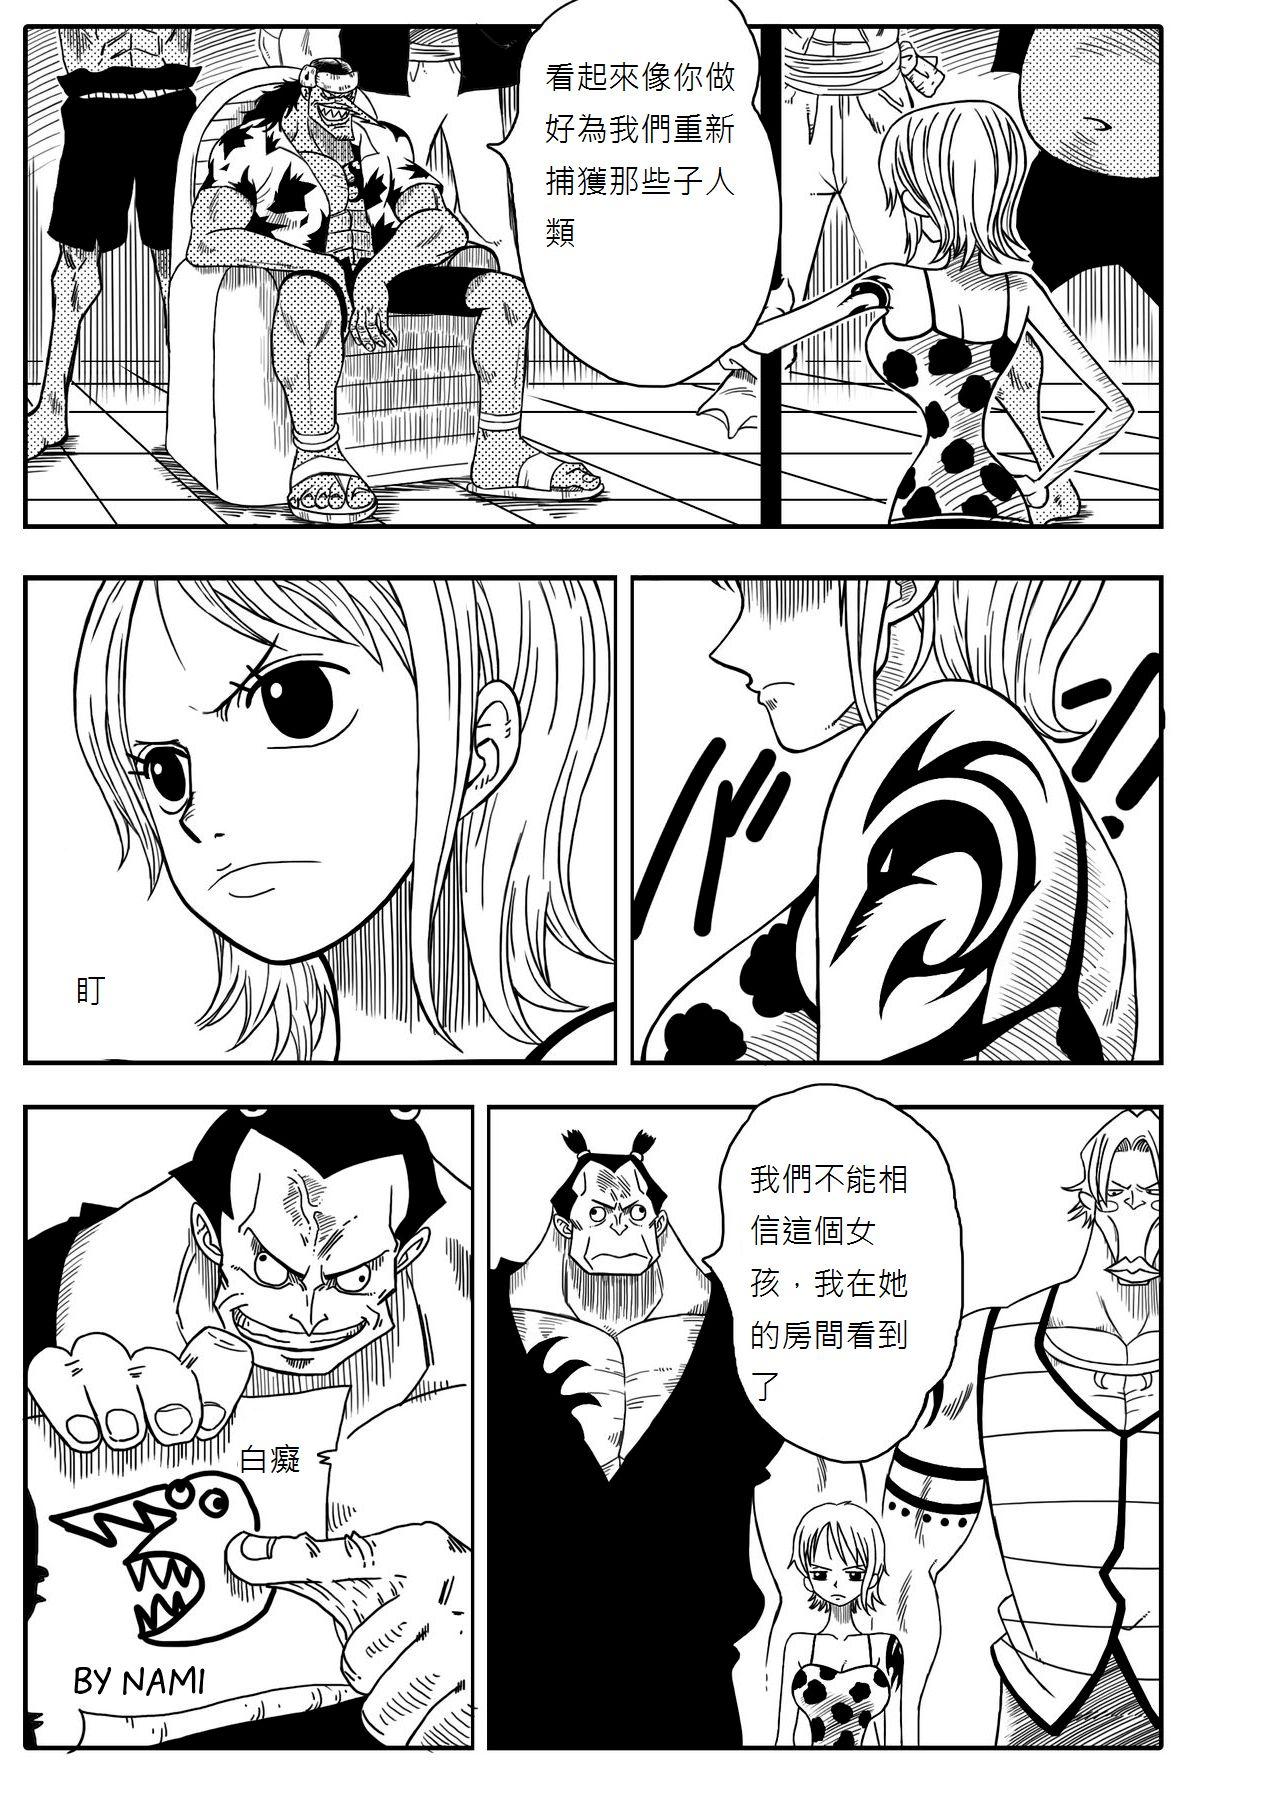 Teen Two Piece - Nami vs Arlong - One piece Toy - Page 4